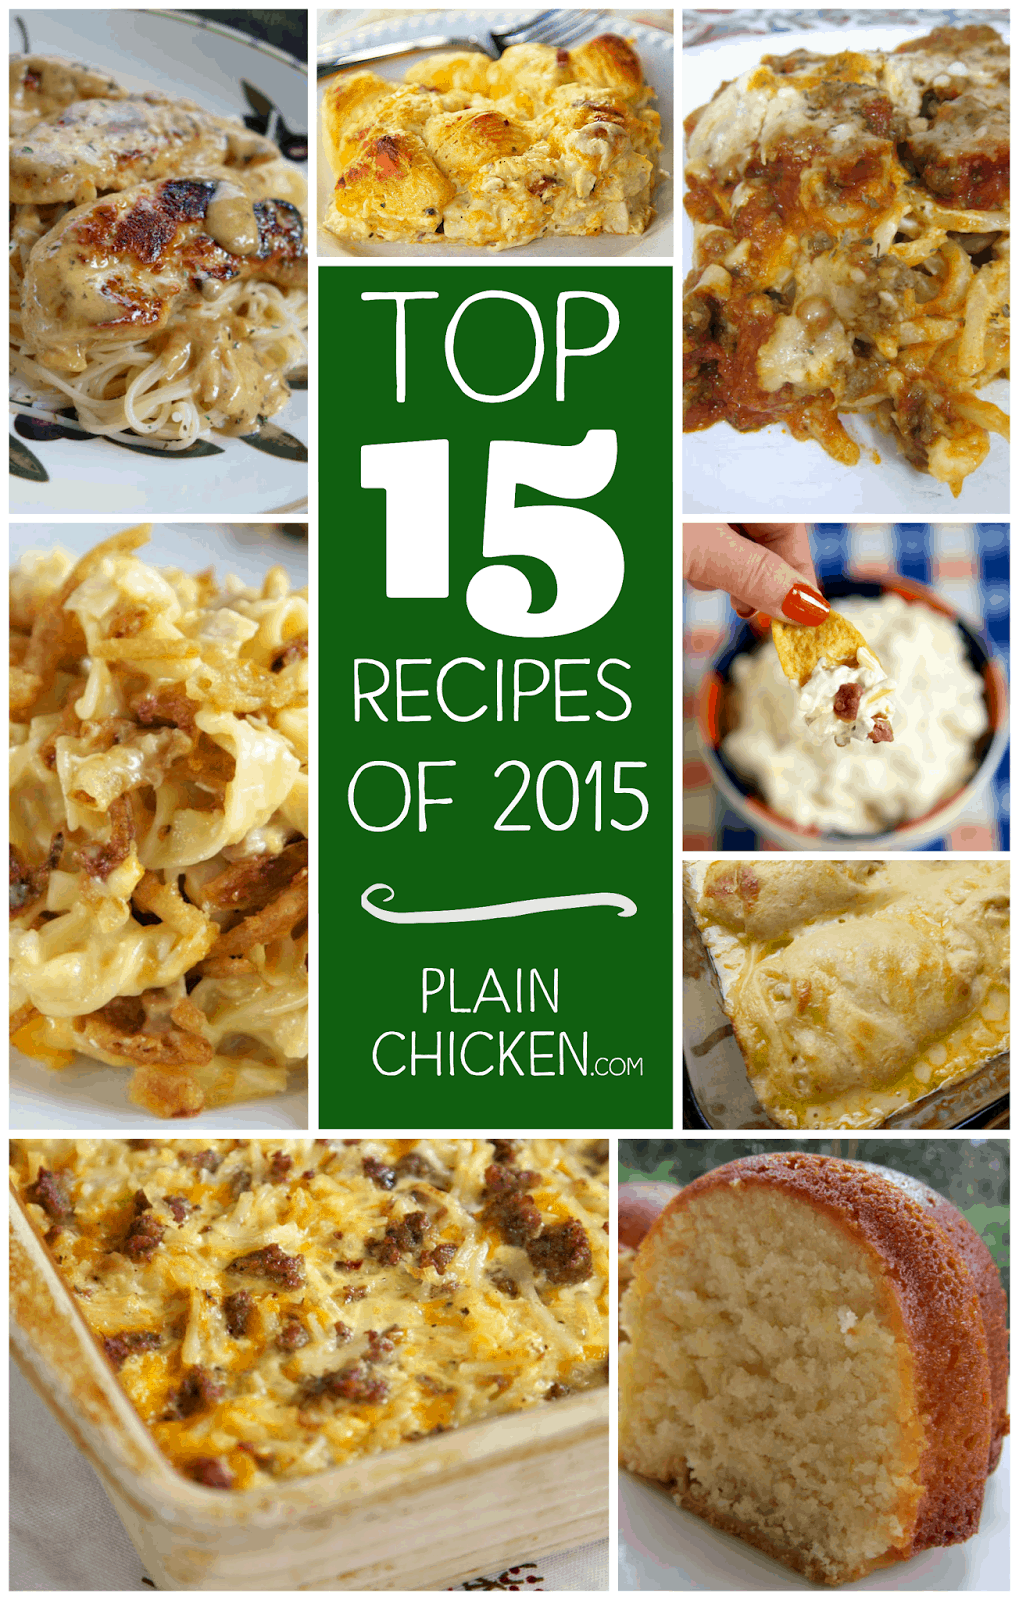 Top 15 Recipes of 2015 on PlainChicken.com - you don't want to miss this list! All of our favorite recipes are on this list!! Quick, easy, kid-friendly and delicious!